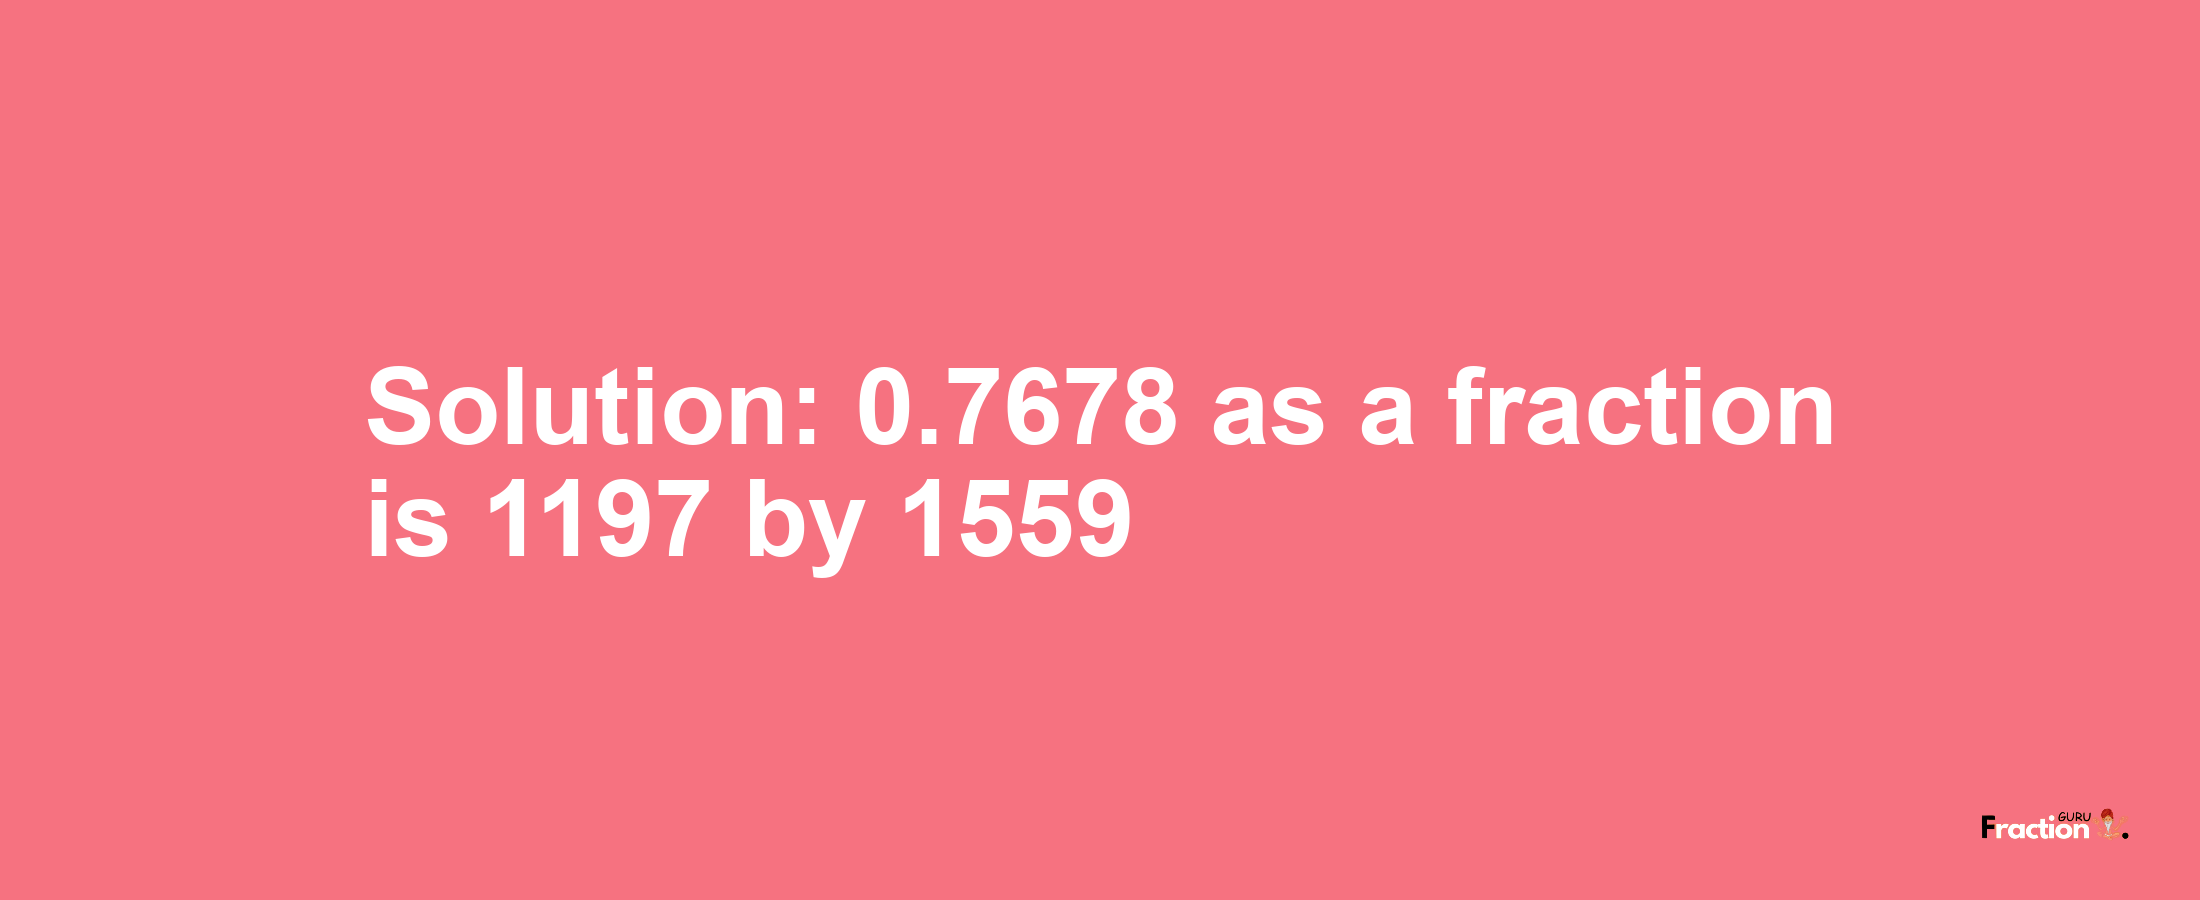 Solution:0.7678 as a fraction is 1197/1559